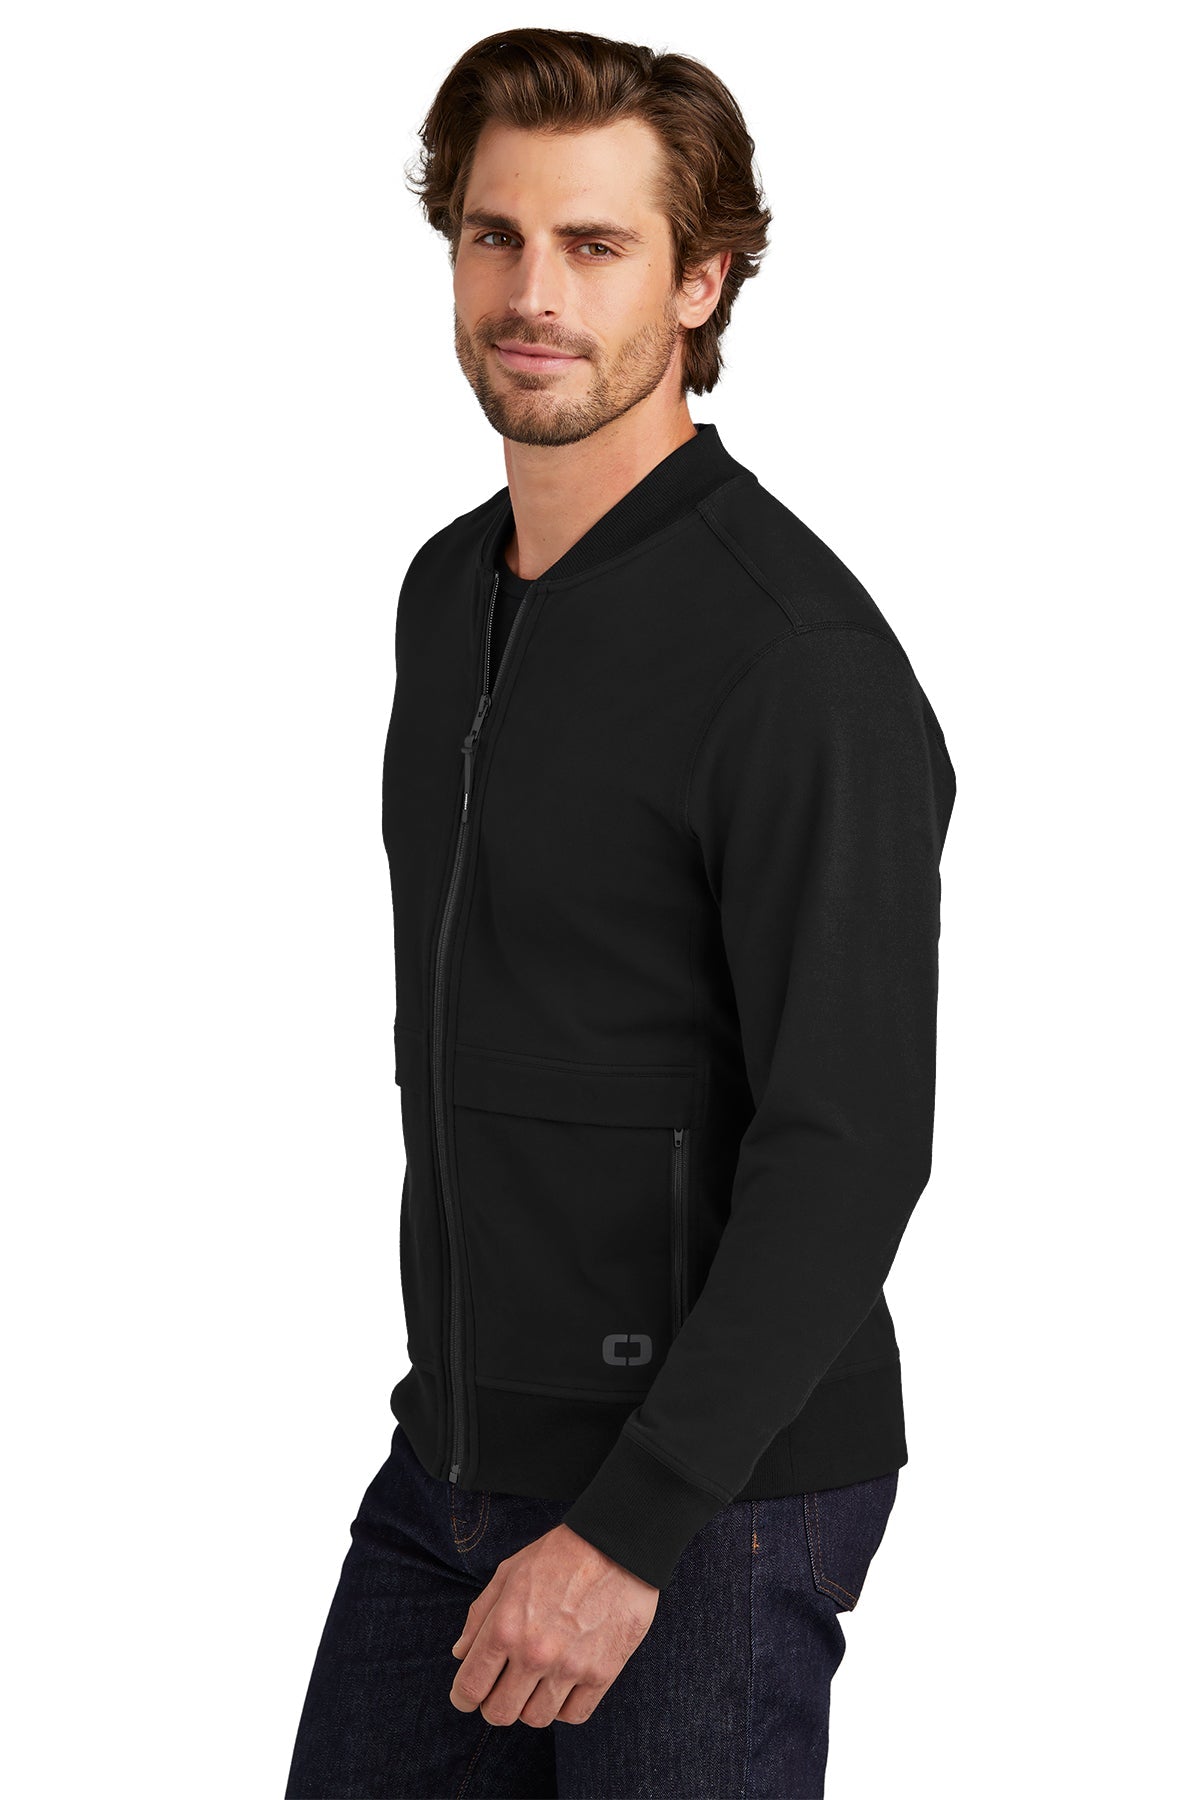 OGIO Outstretch Customized Jackets, Blacktop